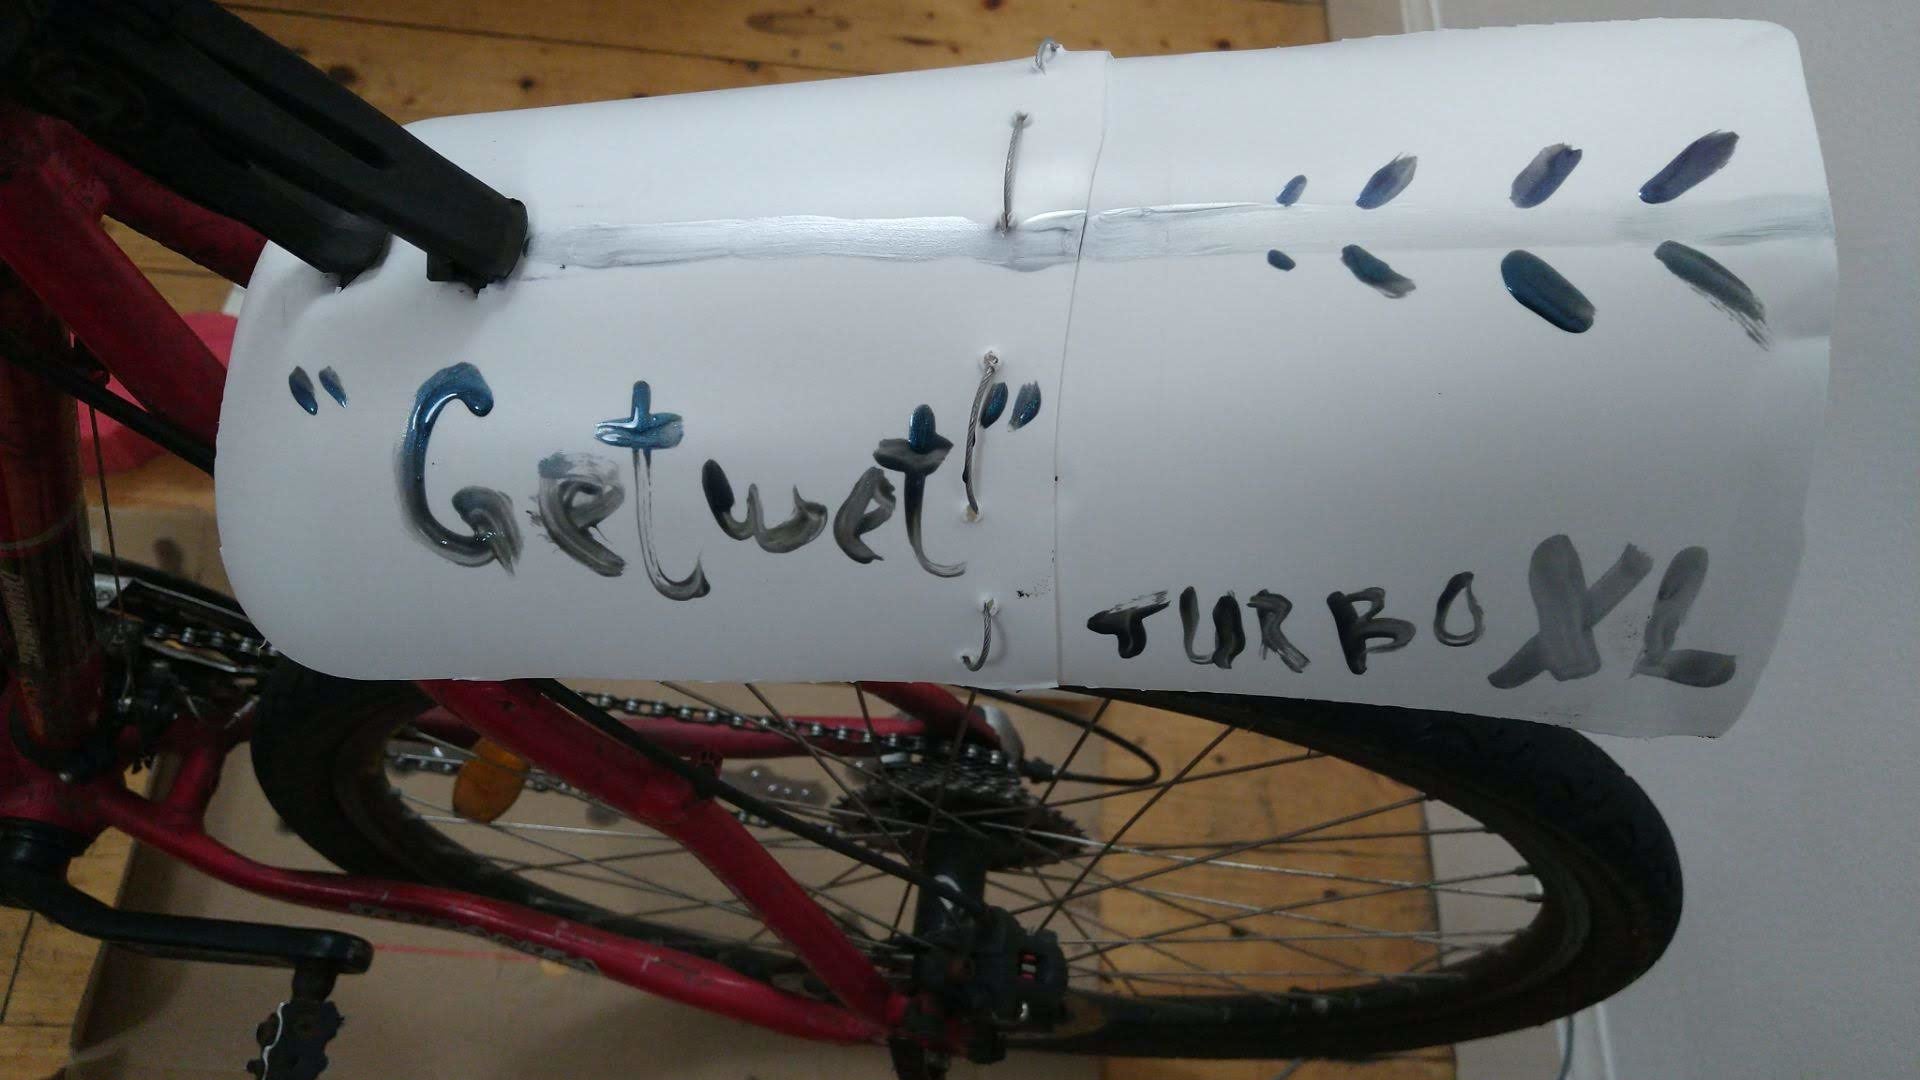 A photo of the temporary mudguard I made for my bike.